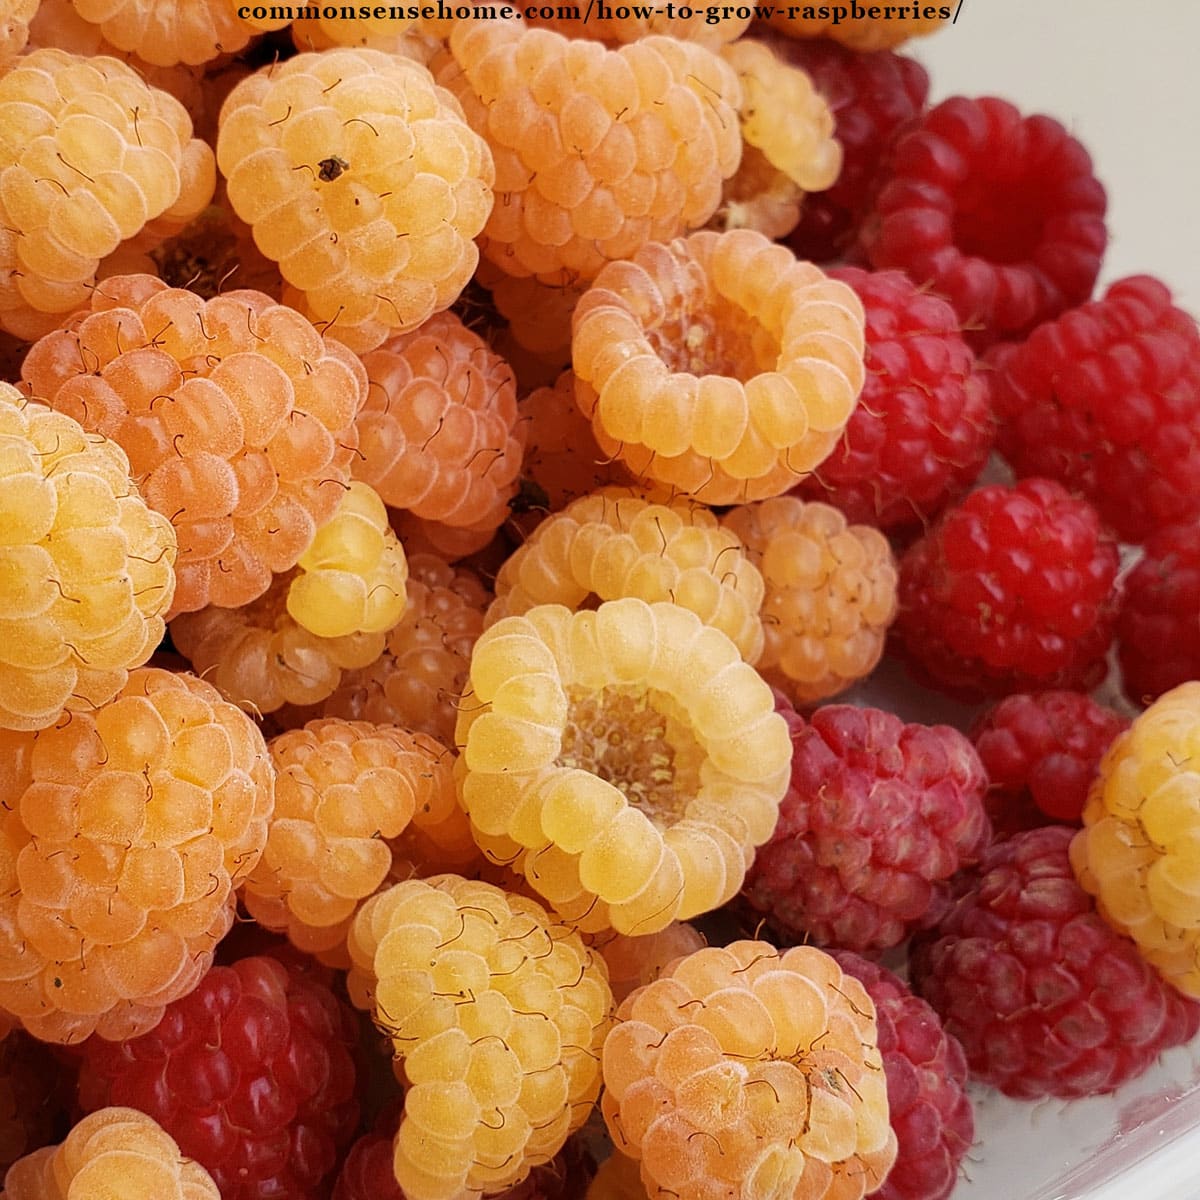 golden and red raspberries